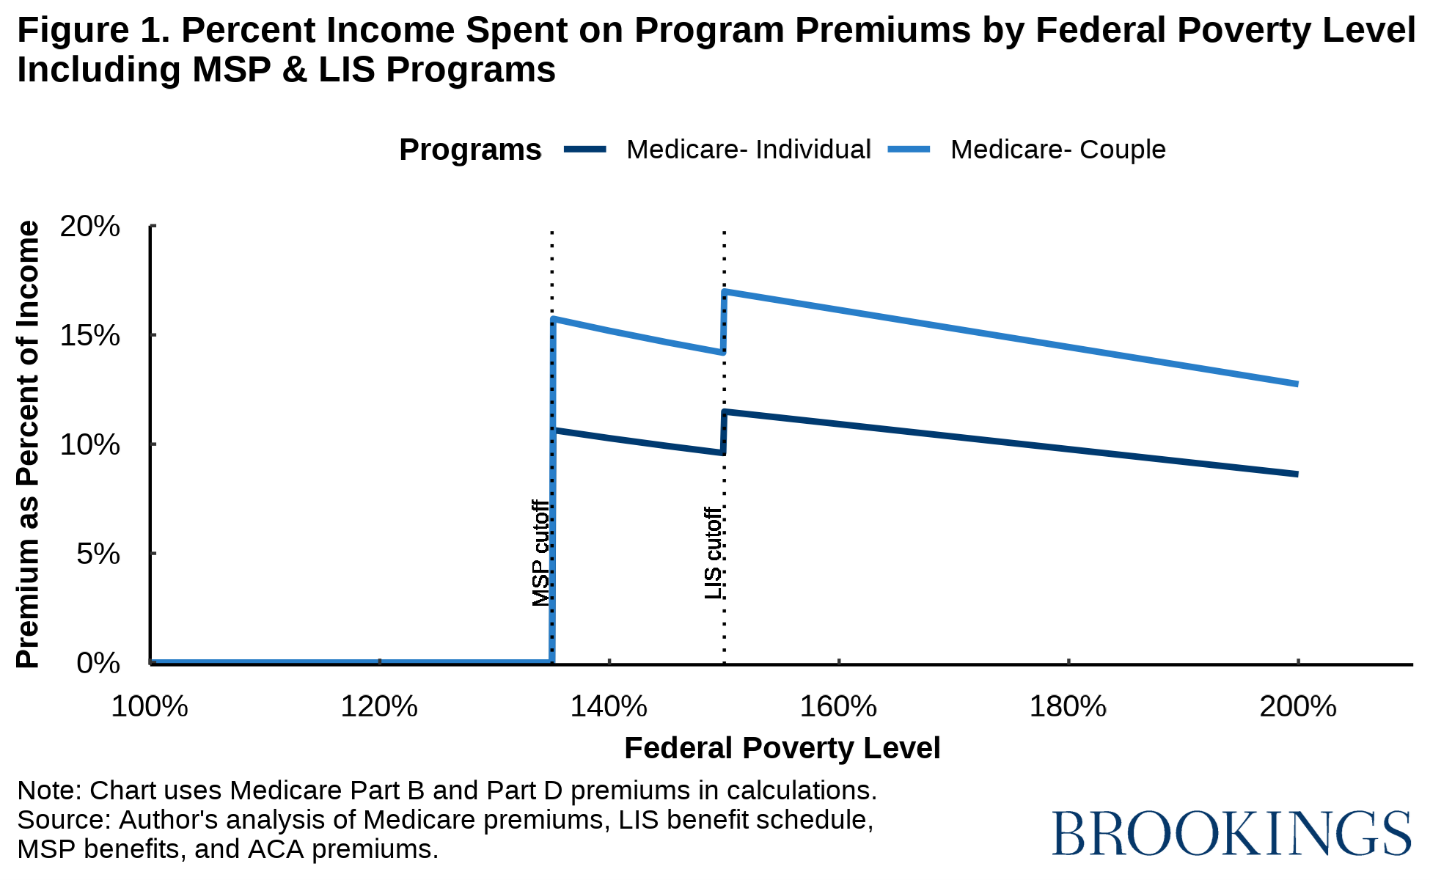 Figure 1. Percent Income Spent on Program Premiums by Federal Poverty Level Including MSP and LIS Programs